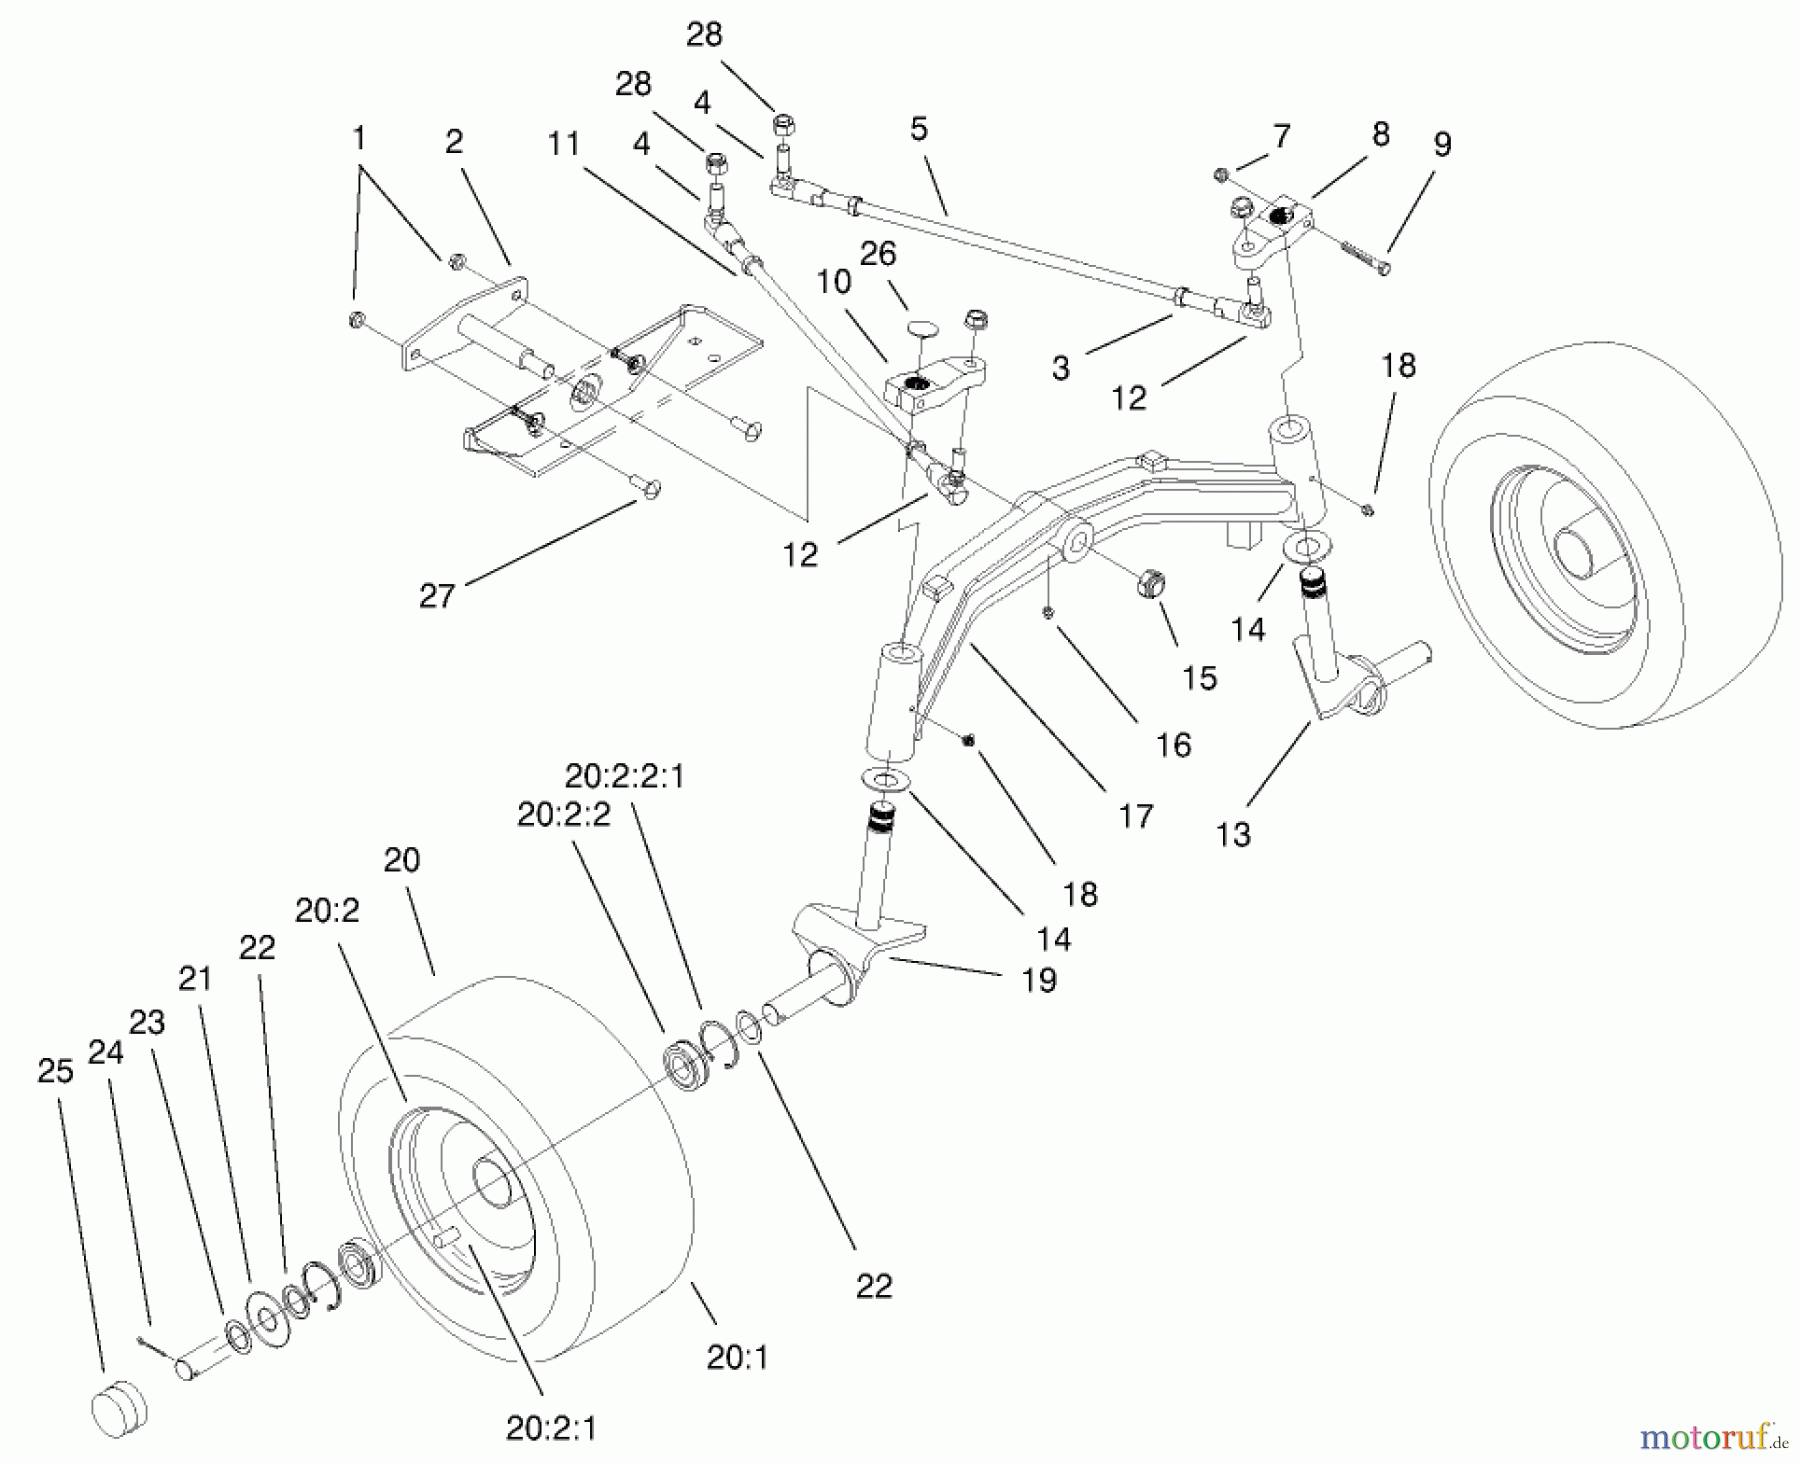  Toro Neu Mowers, Lawn & Garden Tractor Seite 1 73552 (523Dxi) - Toro 523Dxi Garden Tractor, 2000 (200000001-200999999) TIE RODS, SPINDLE, & FRONT AXLE ASSEMBLY